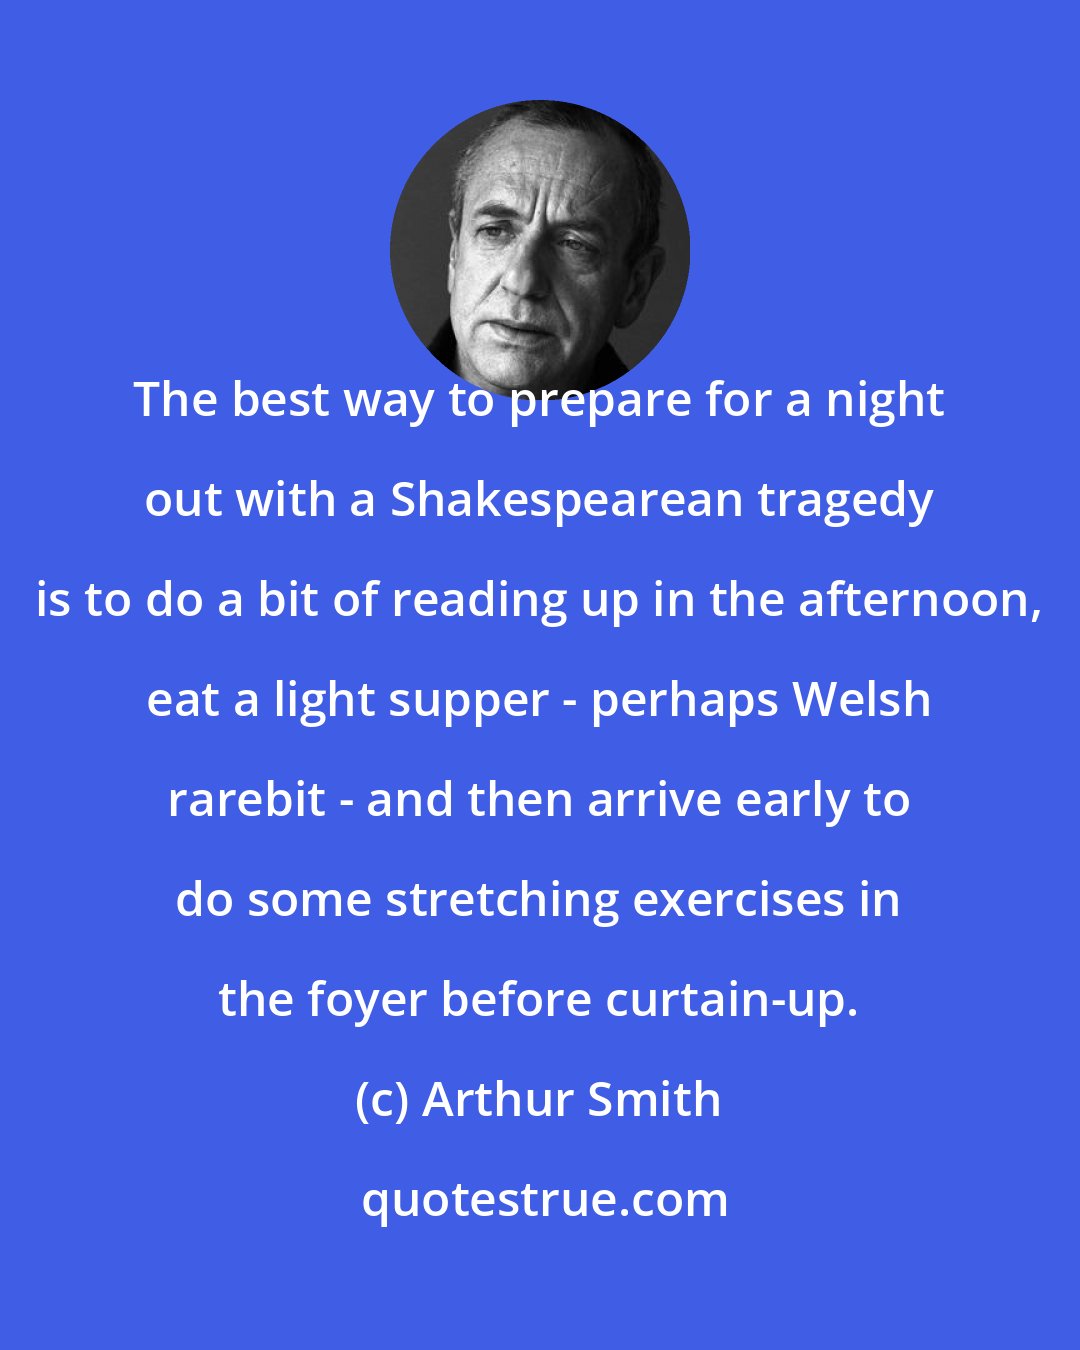 Arthur Smith: The best way to prepare for a night out with a Shakespearean tragedy is to do a bit of reading up in the afternoon, eat a light supper - perhaps Welsh rarebit - and then arrive early to do some stretching exercises in the foyer before curtain-up.